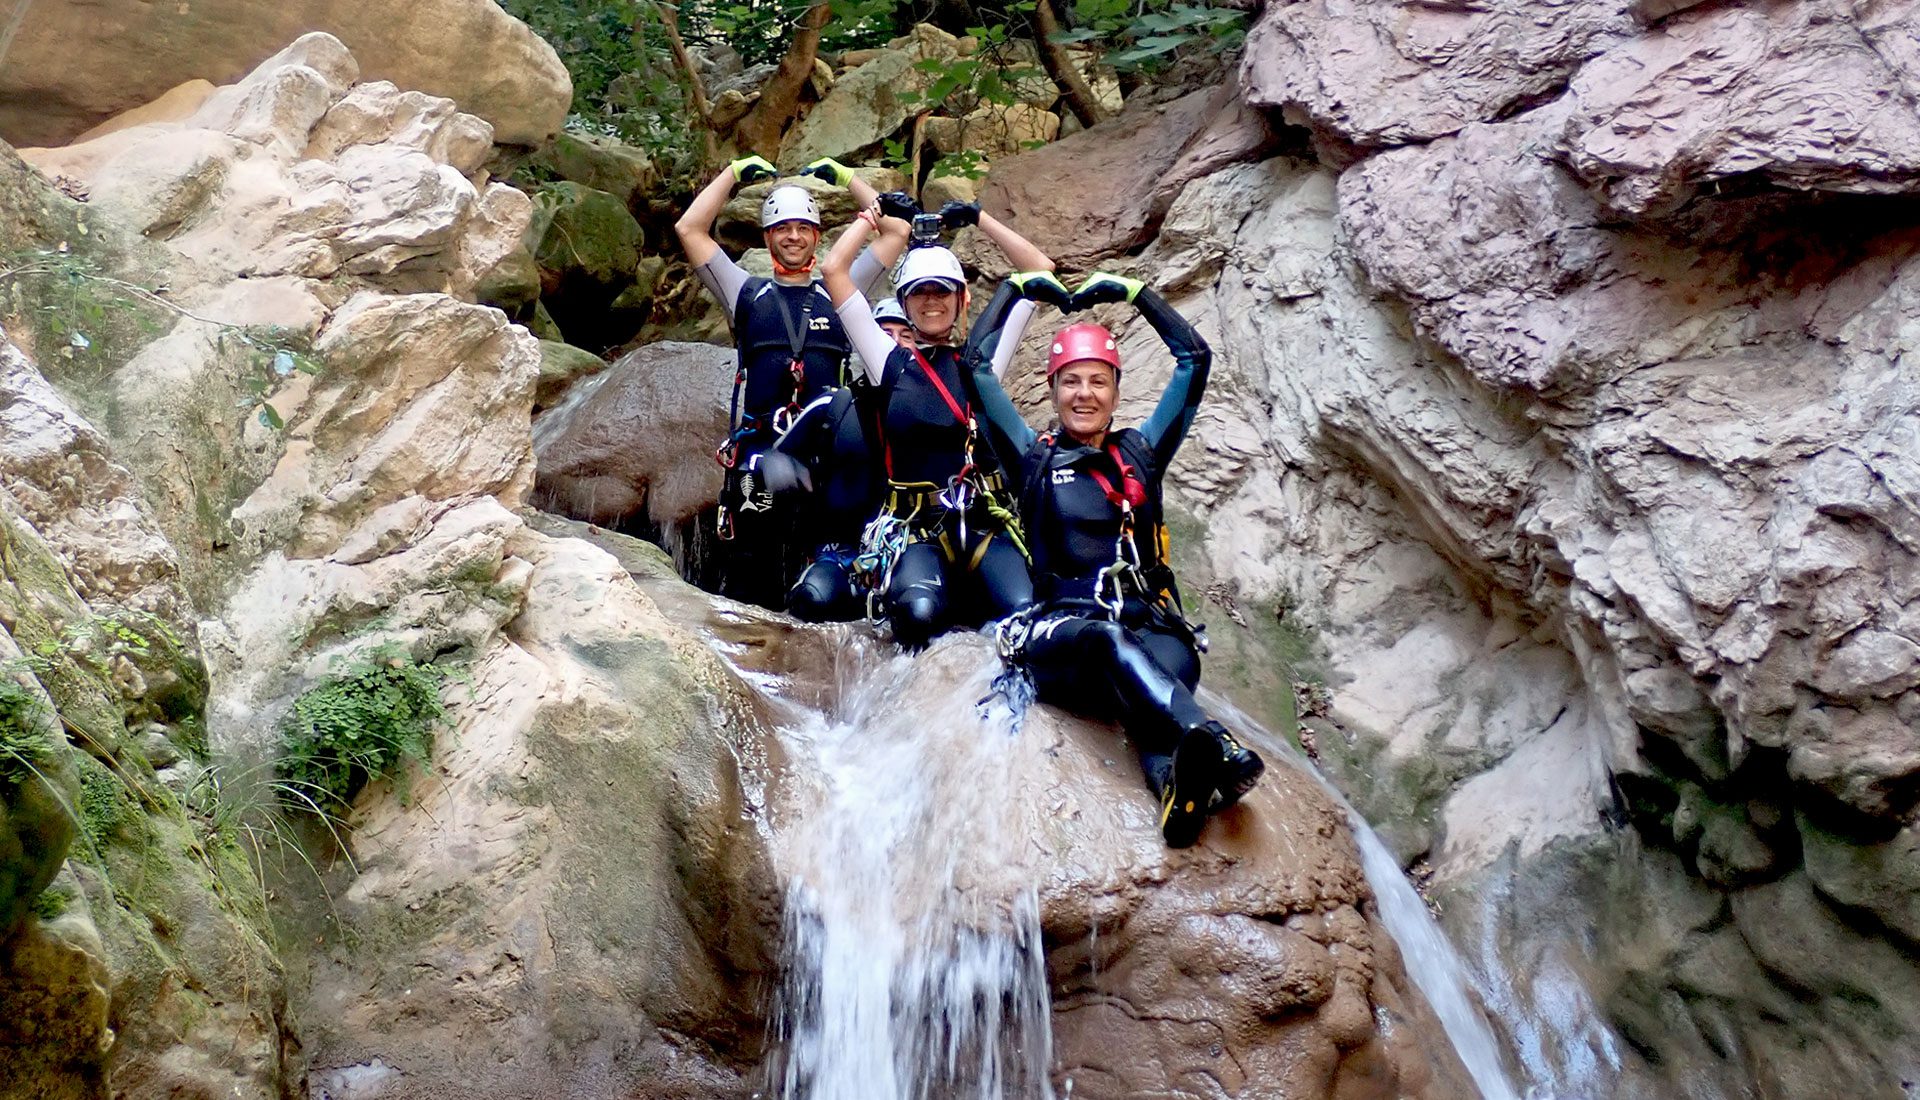 Canyoning is our passion